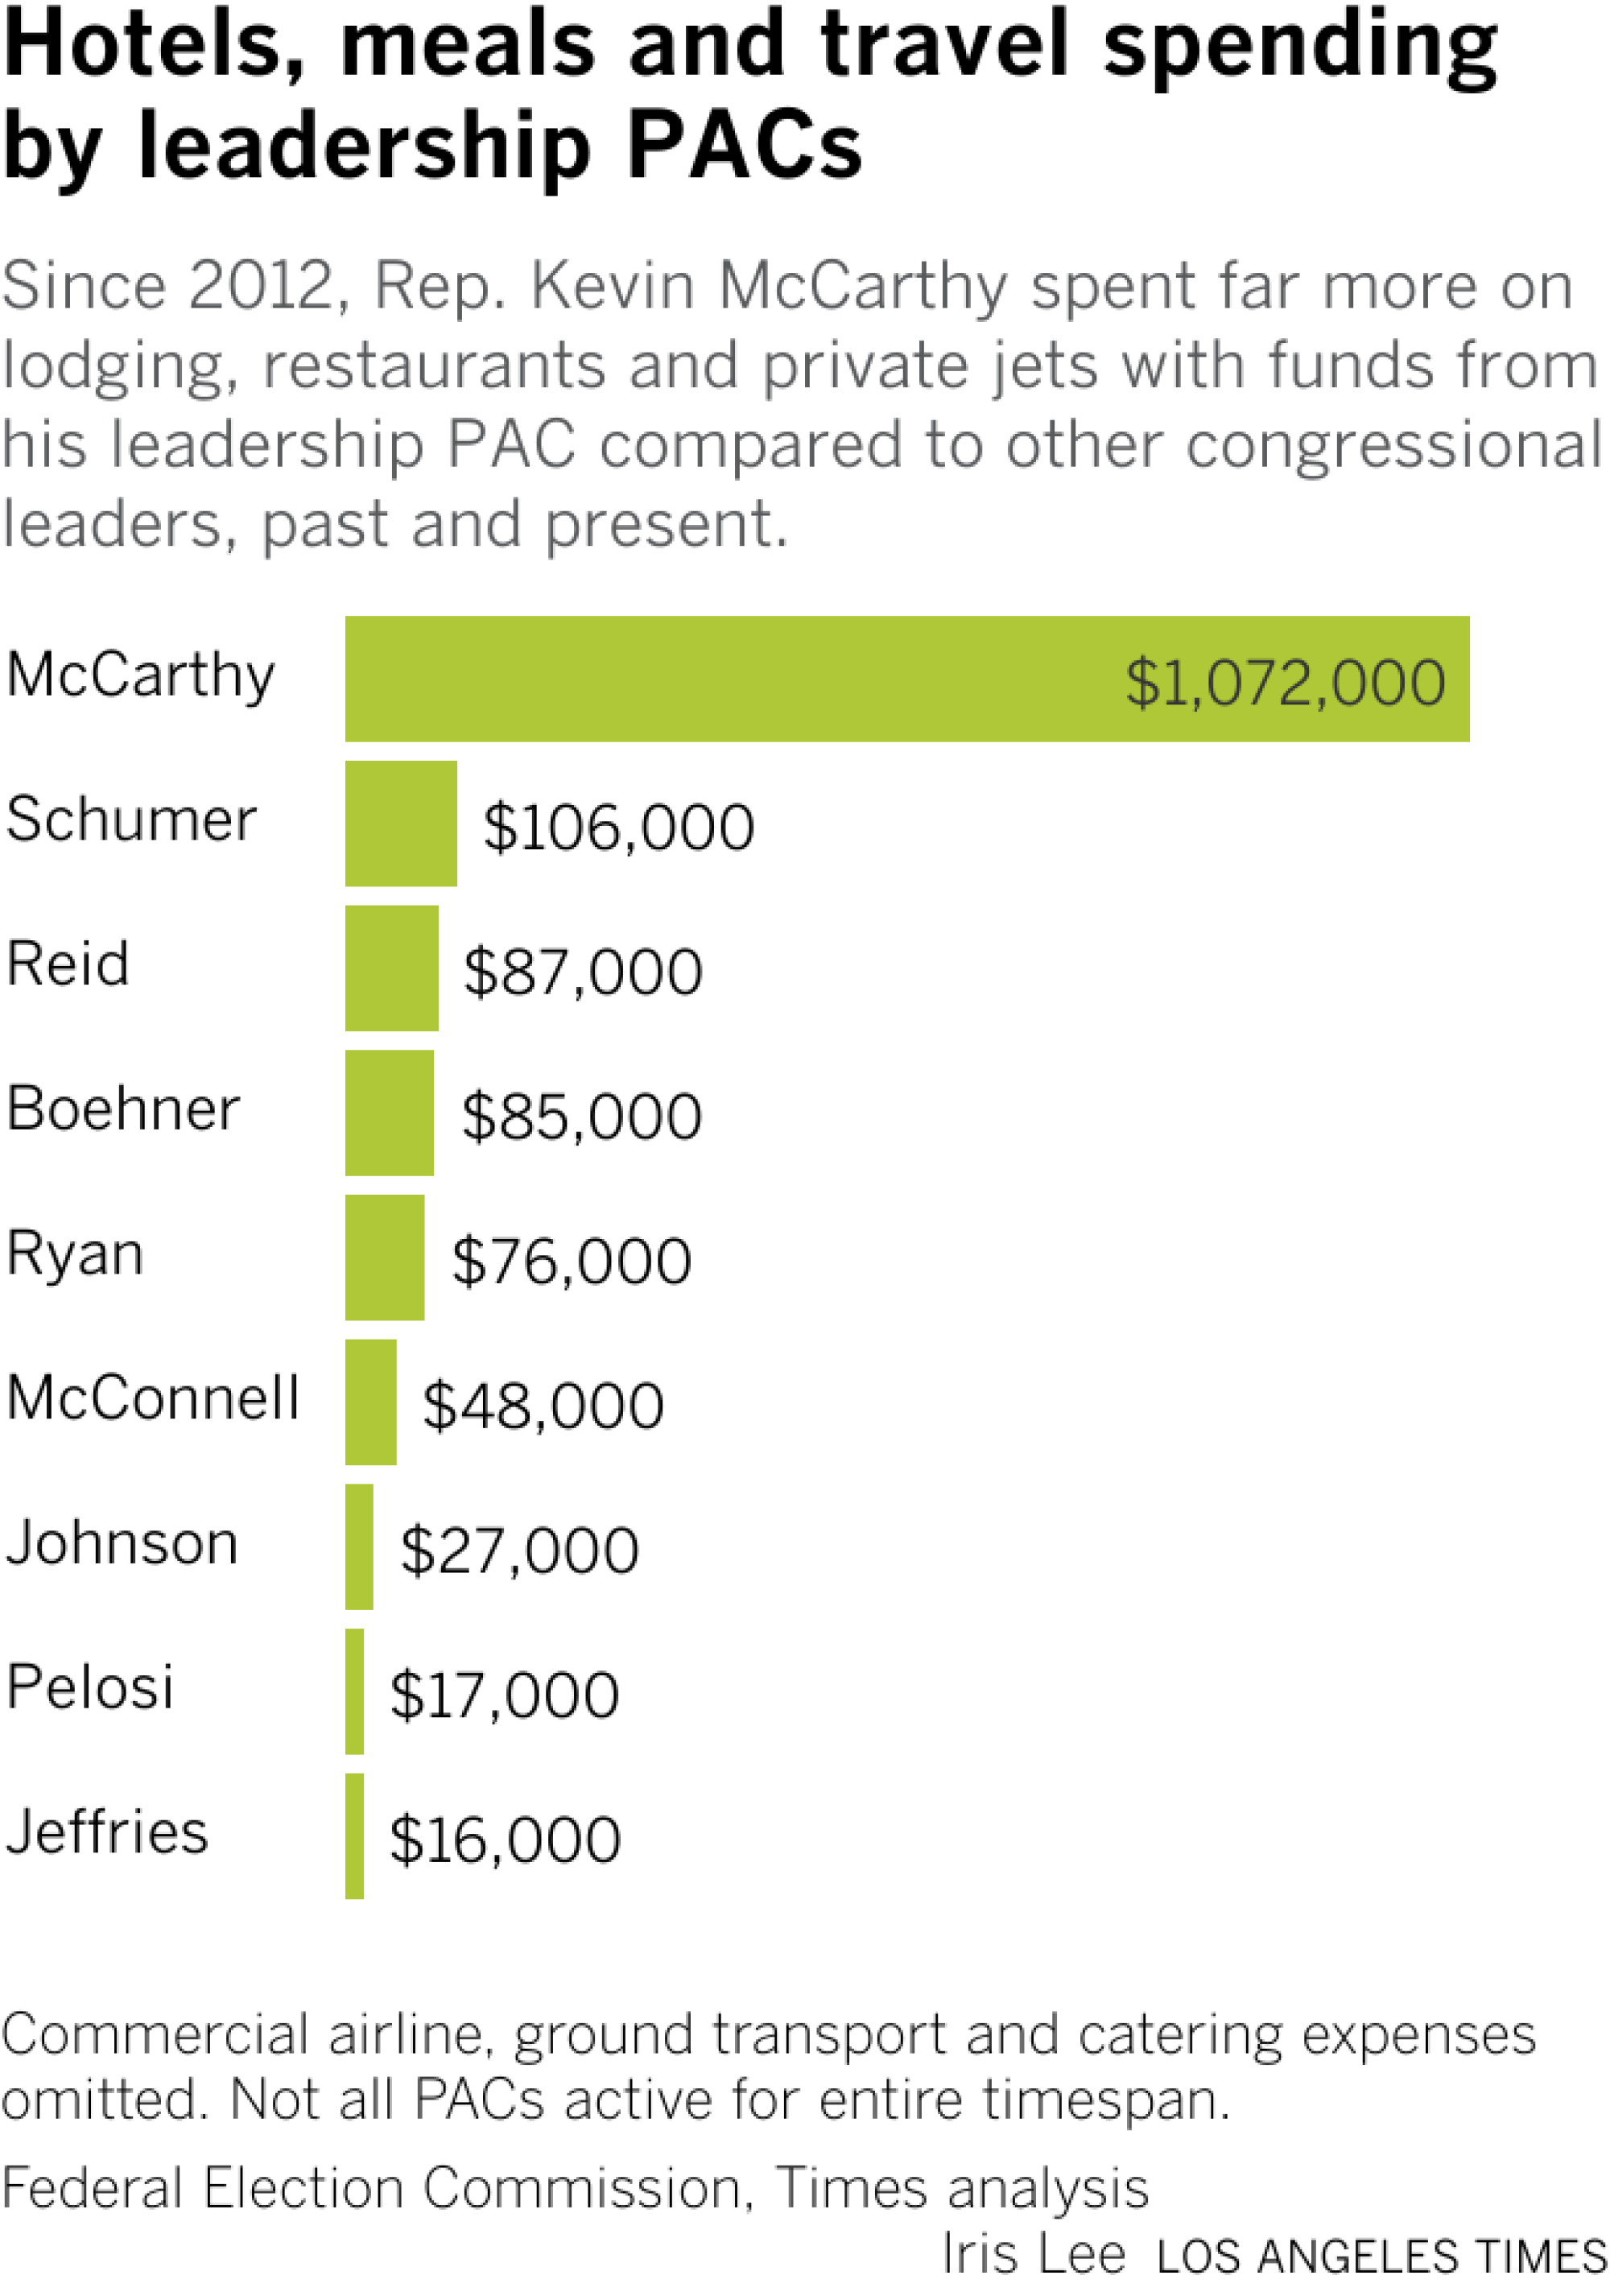 Kevin McCarthy spent over one million in travel, meals and hotels —far more than all other leaders combined.